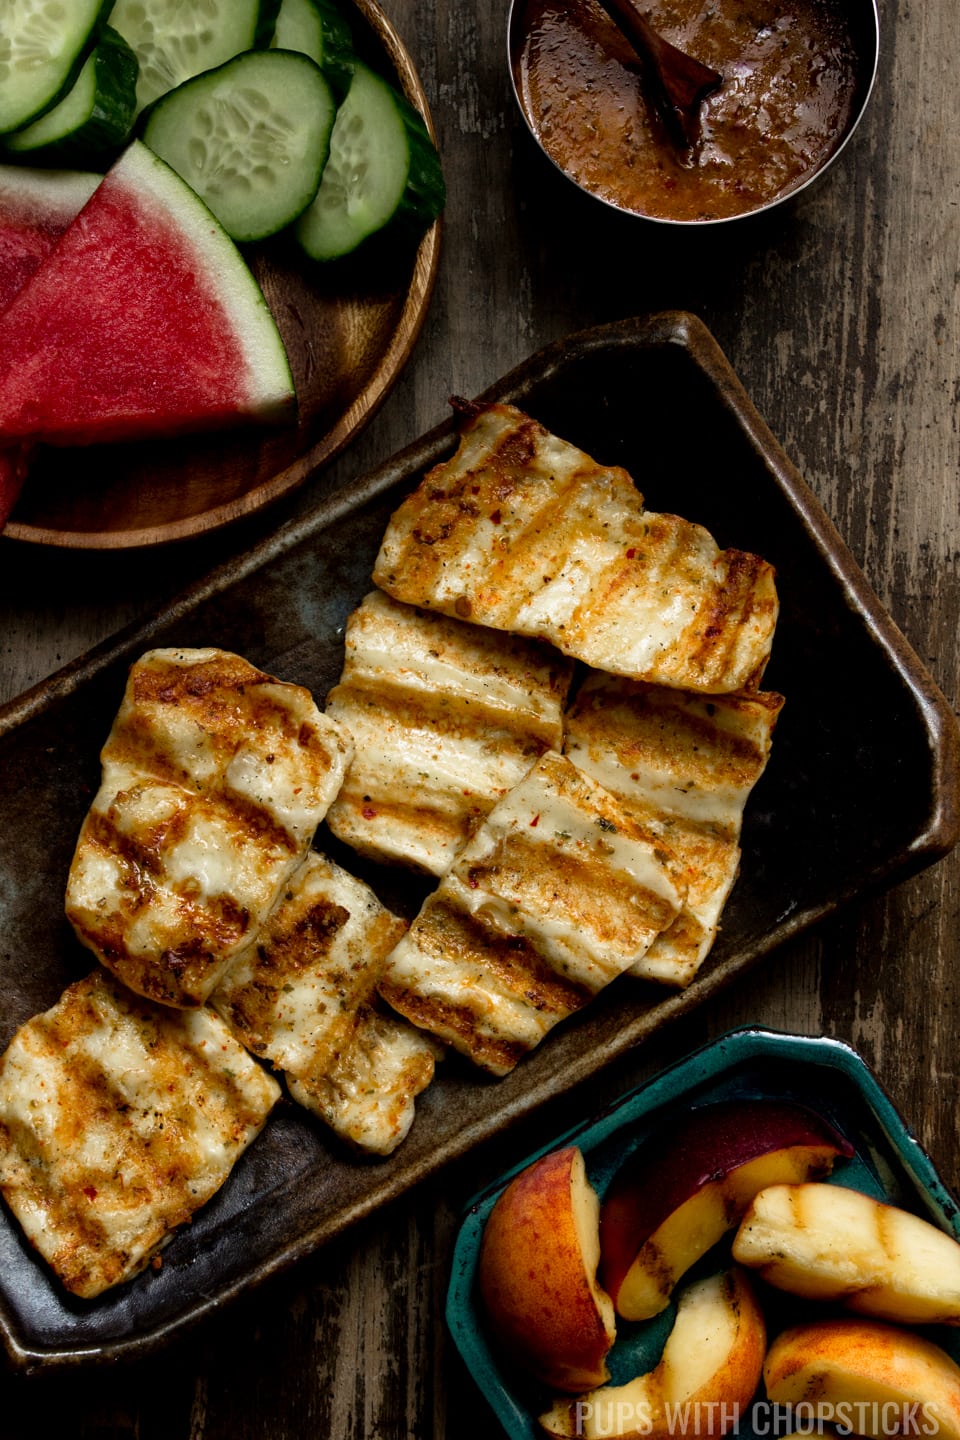 A grilled halloumi cheese recipe, marinated in a spiced basil chili oil and finished off with maple syrup